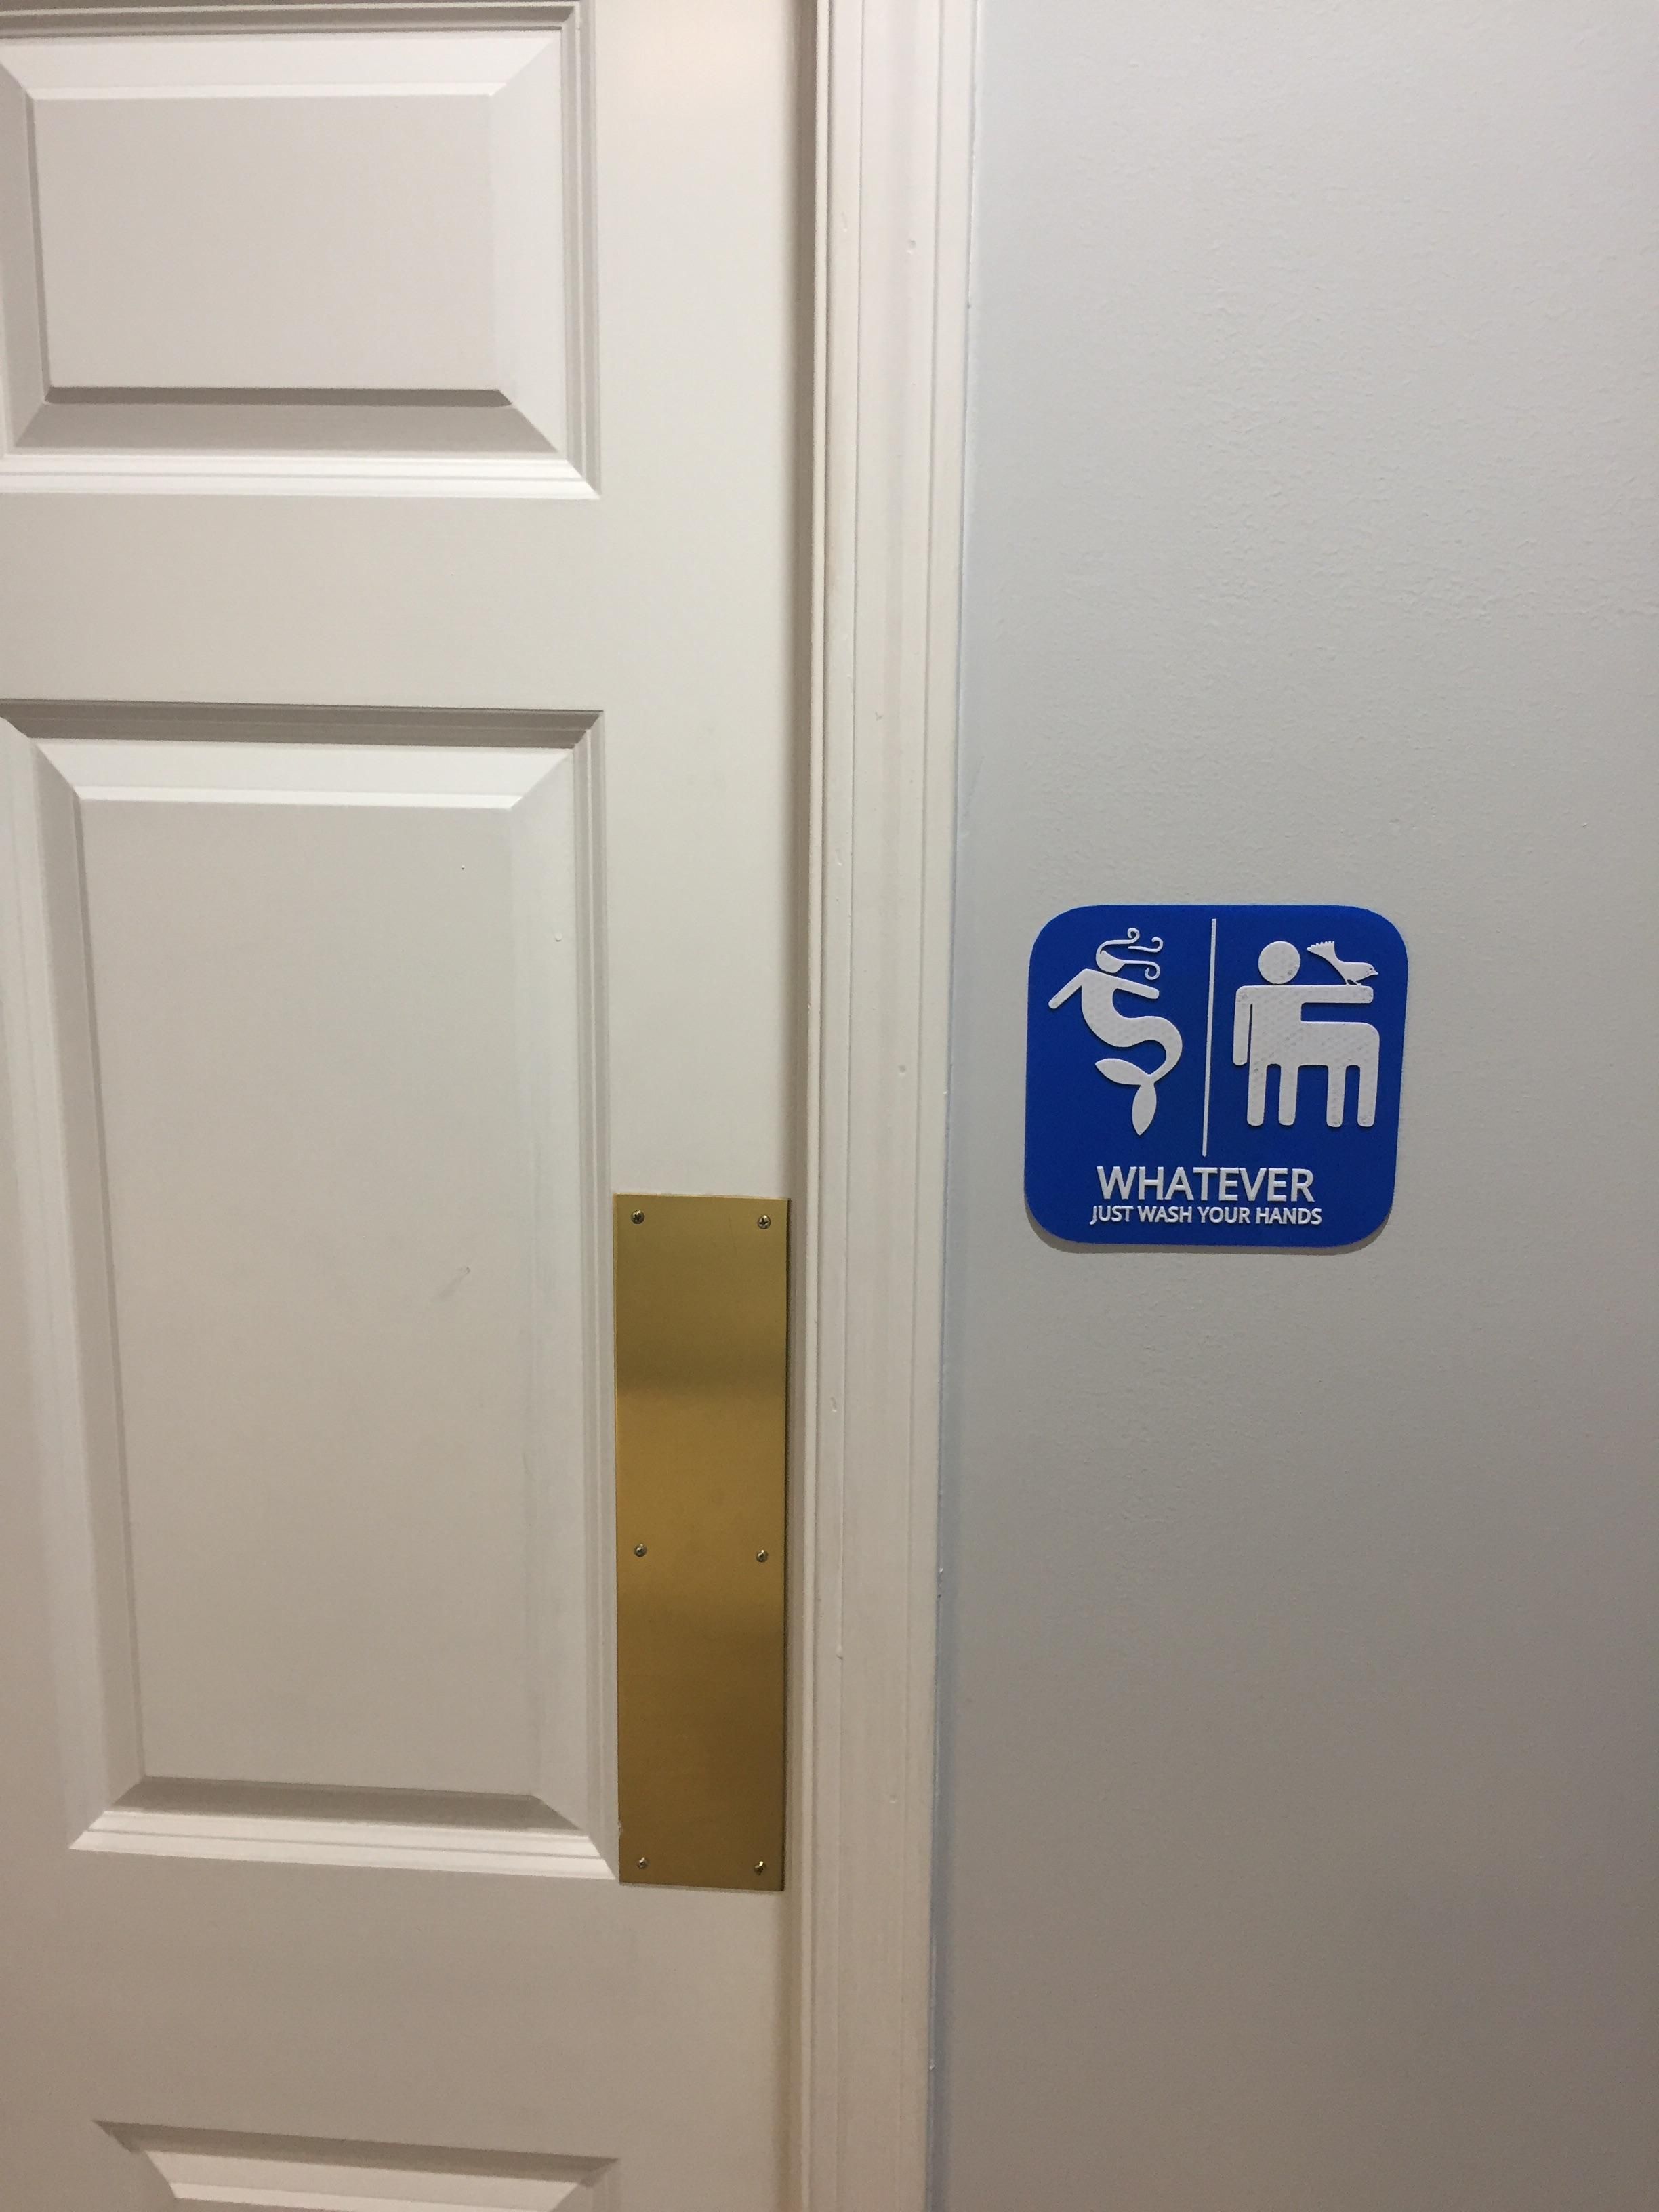 I asked my boss what kind of designation markers she wanted for the two new bathrooms in the office. She ordered these.